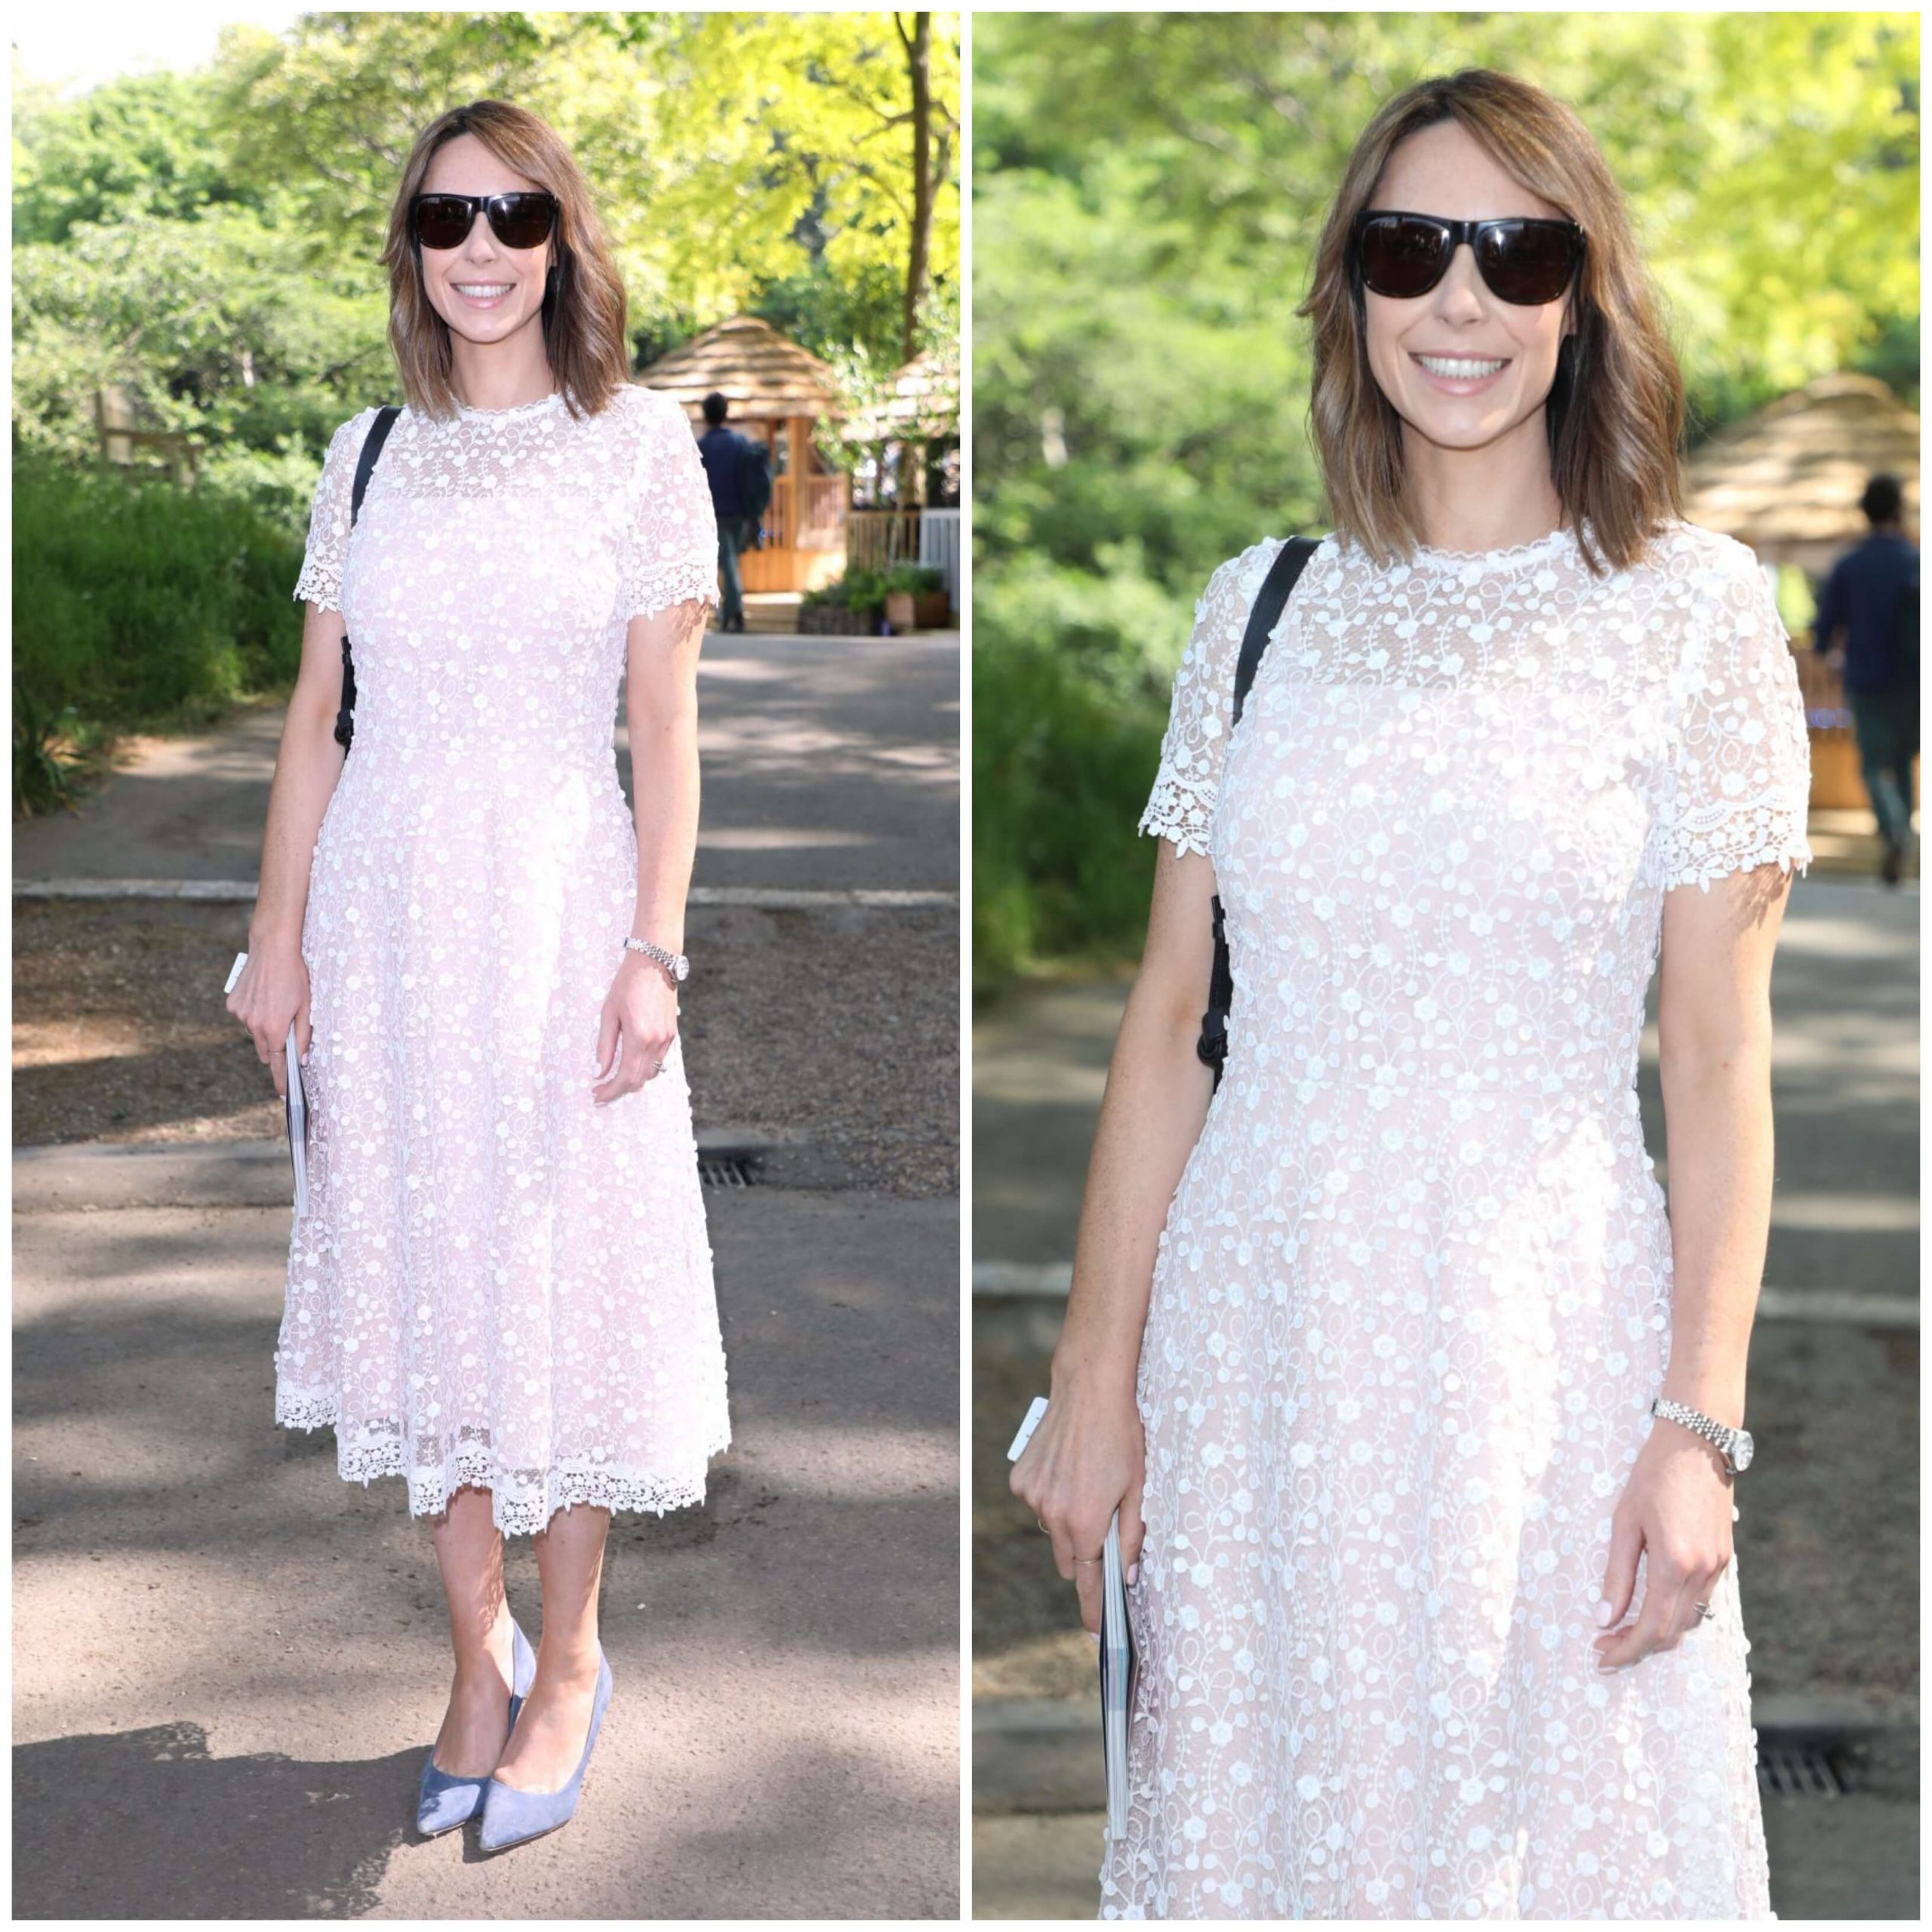 Alex Jones –In White Half Sleeves Short Gown Dress With Black Cool Shades -  Chelsea Flower Show in London